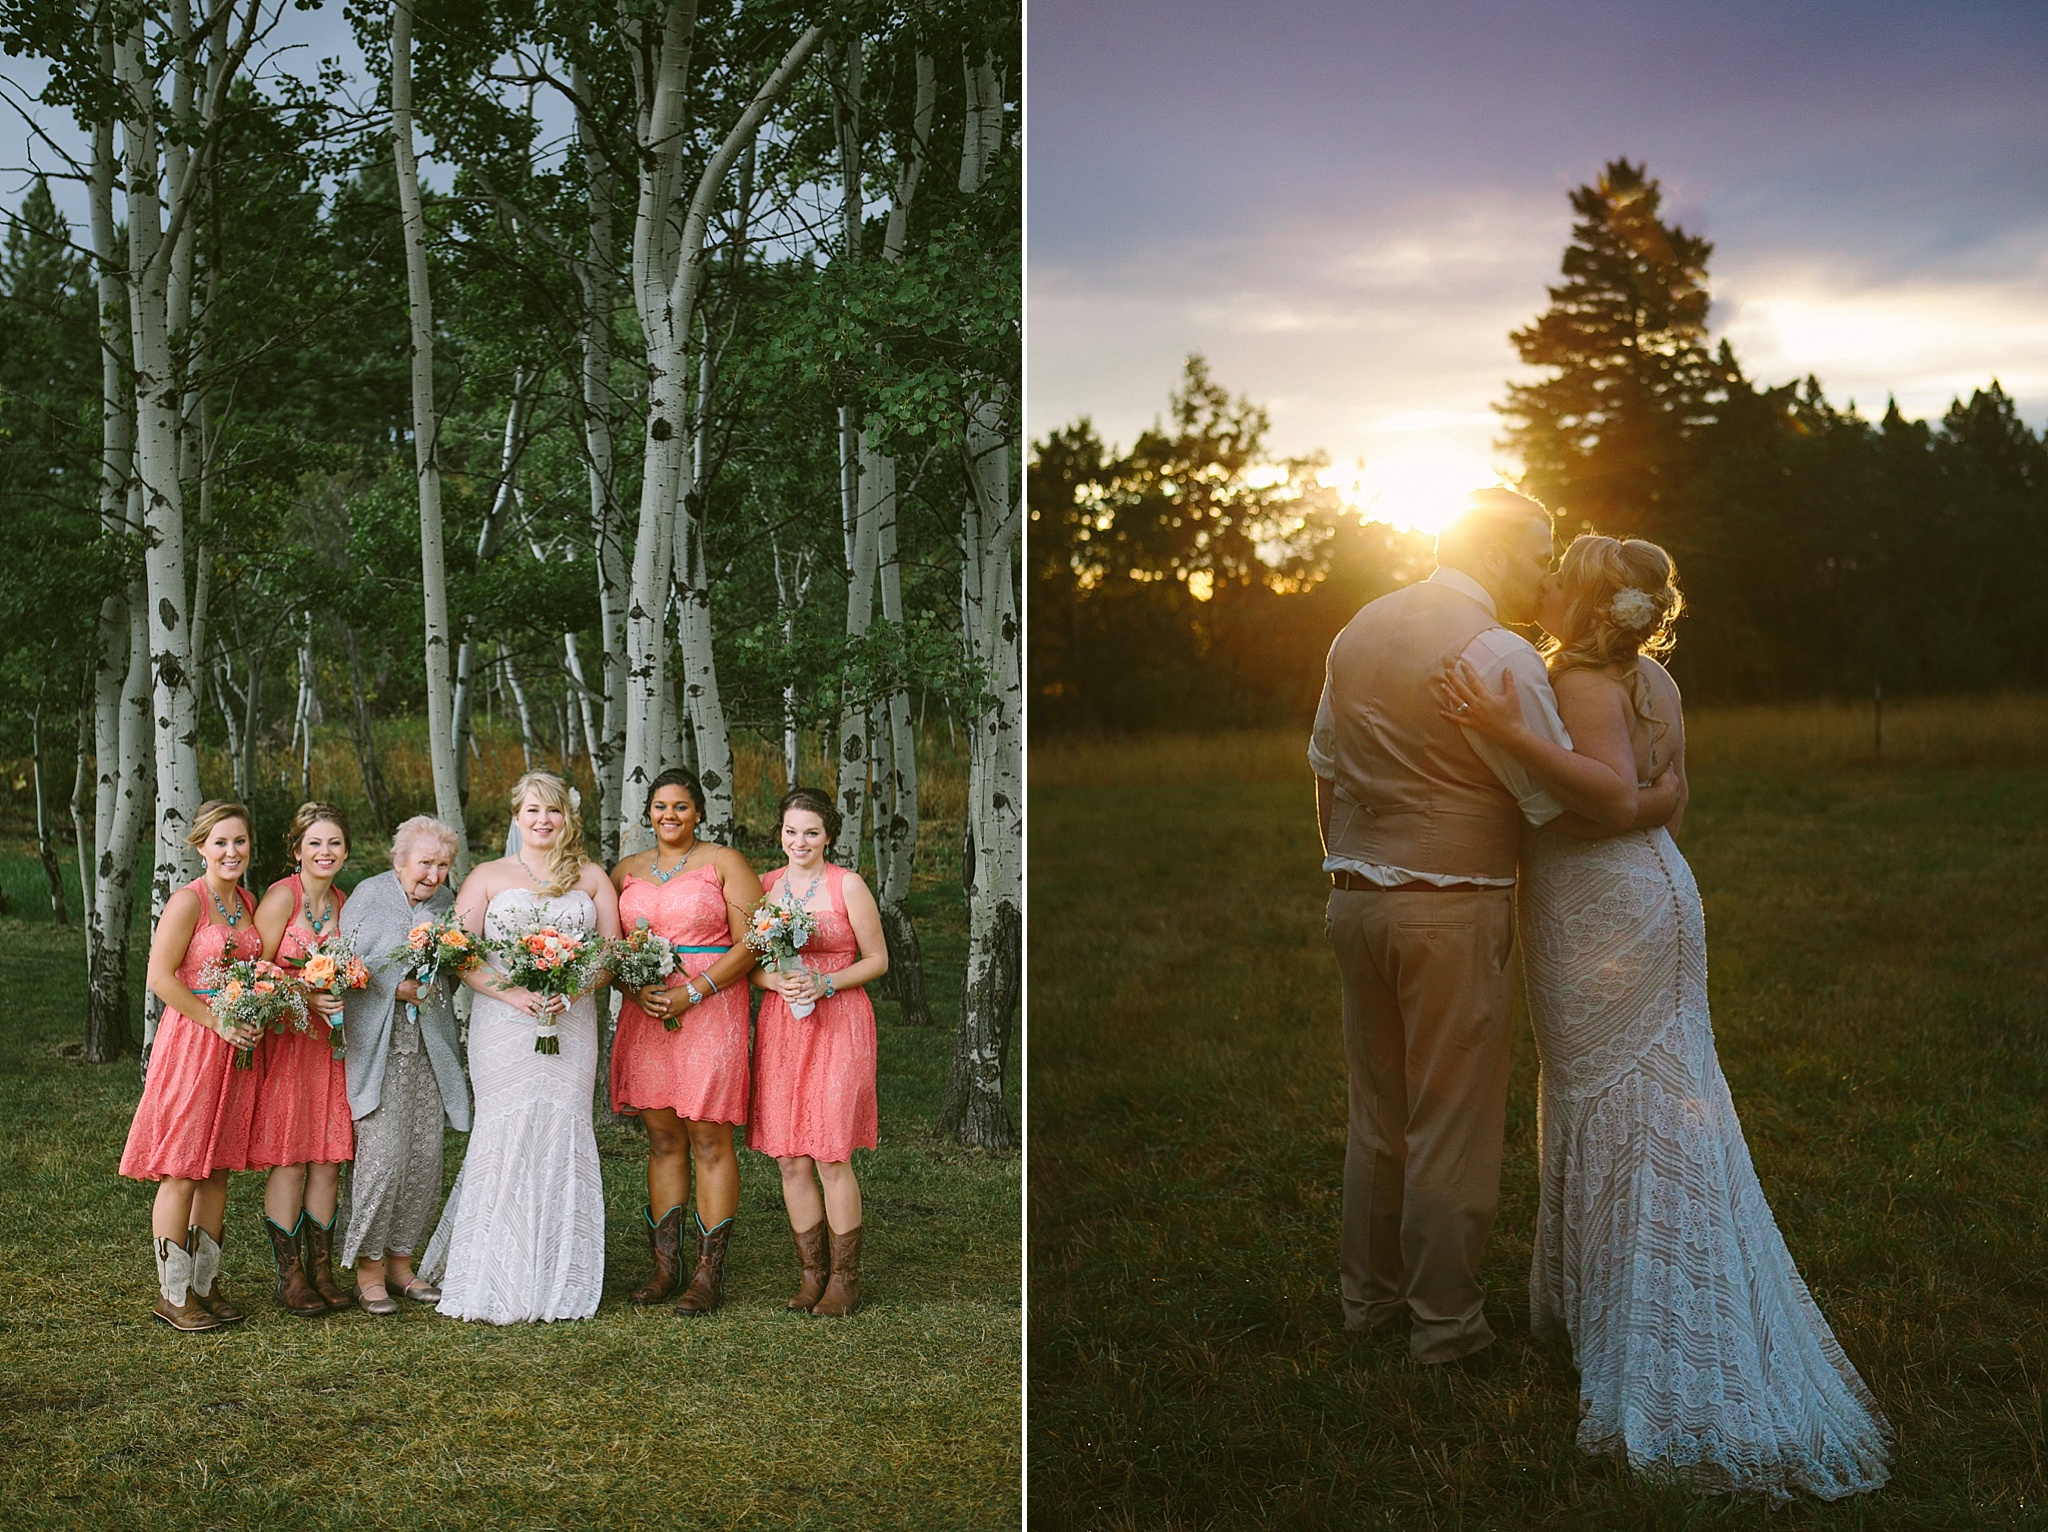 Arrowpeak Lodge Great Falls MT Wedding Photos Pink Bridesmaids and Bride and Groom Kissing at Sunset